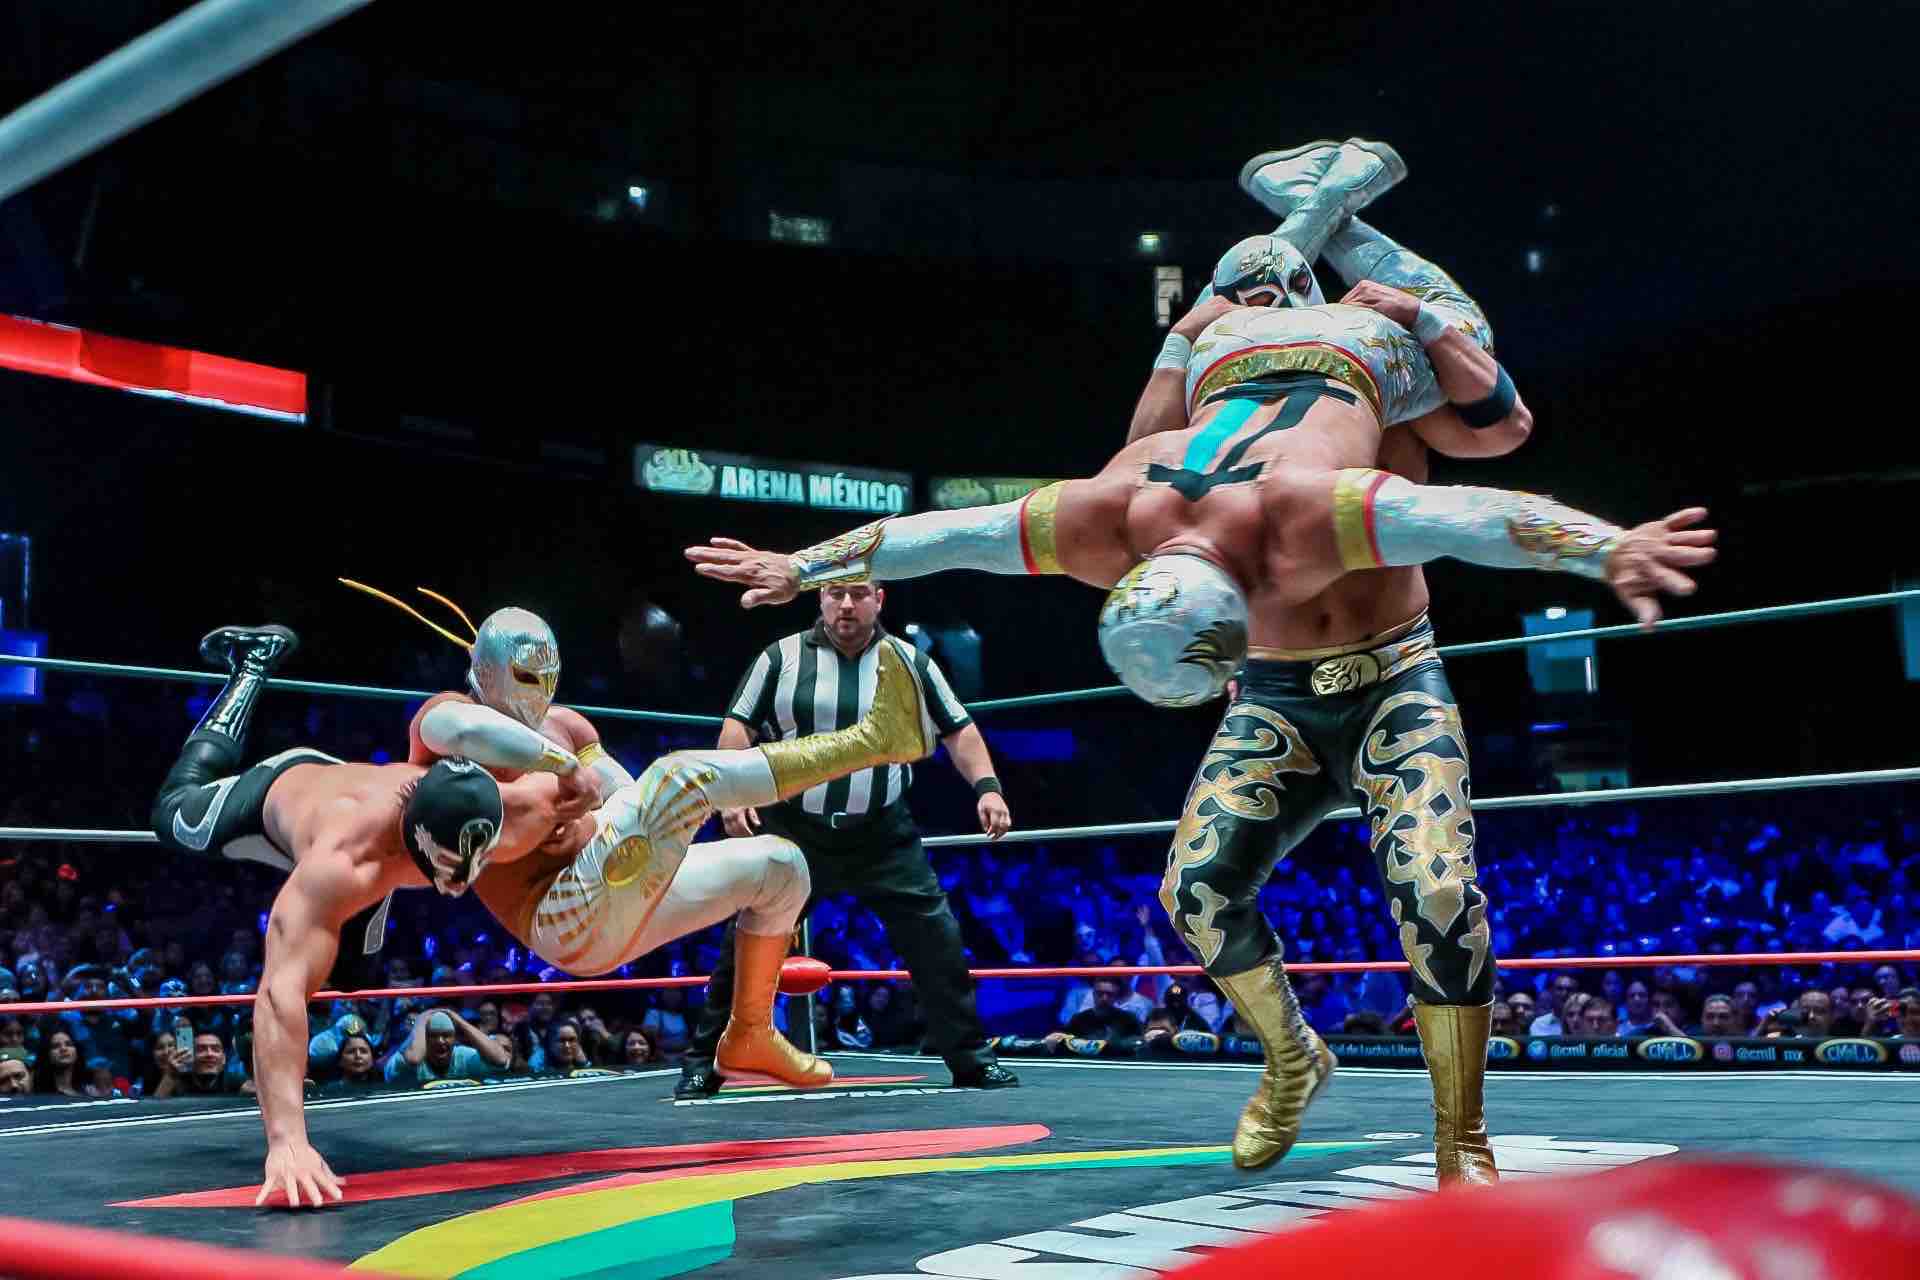 Lucha Libre Mexico City wrestlers fighting